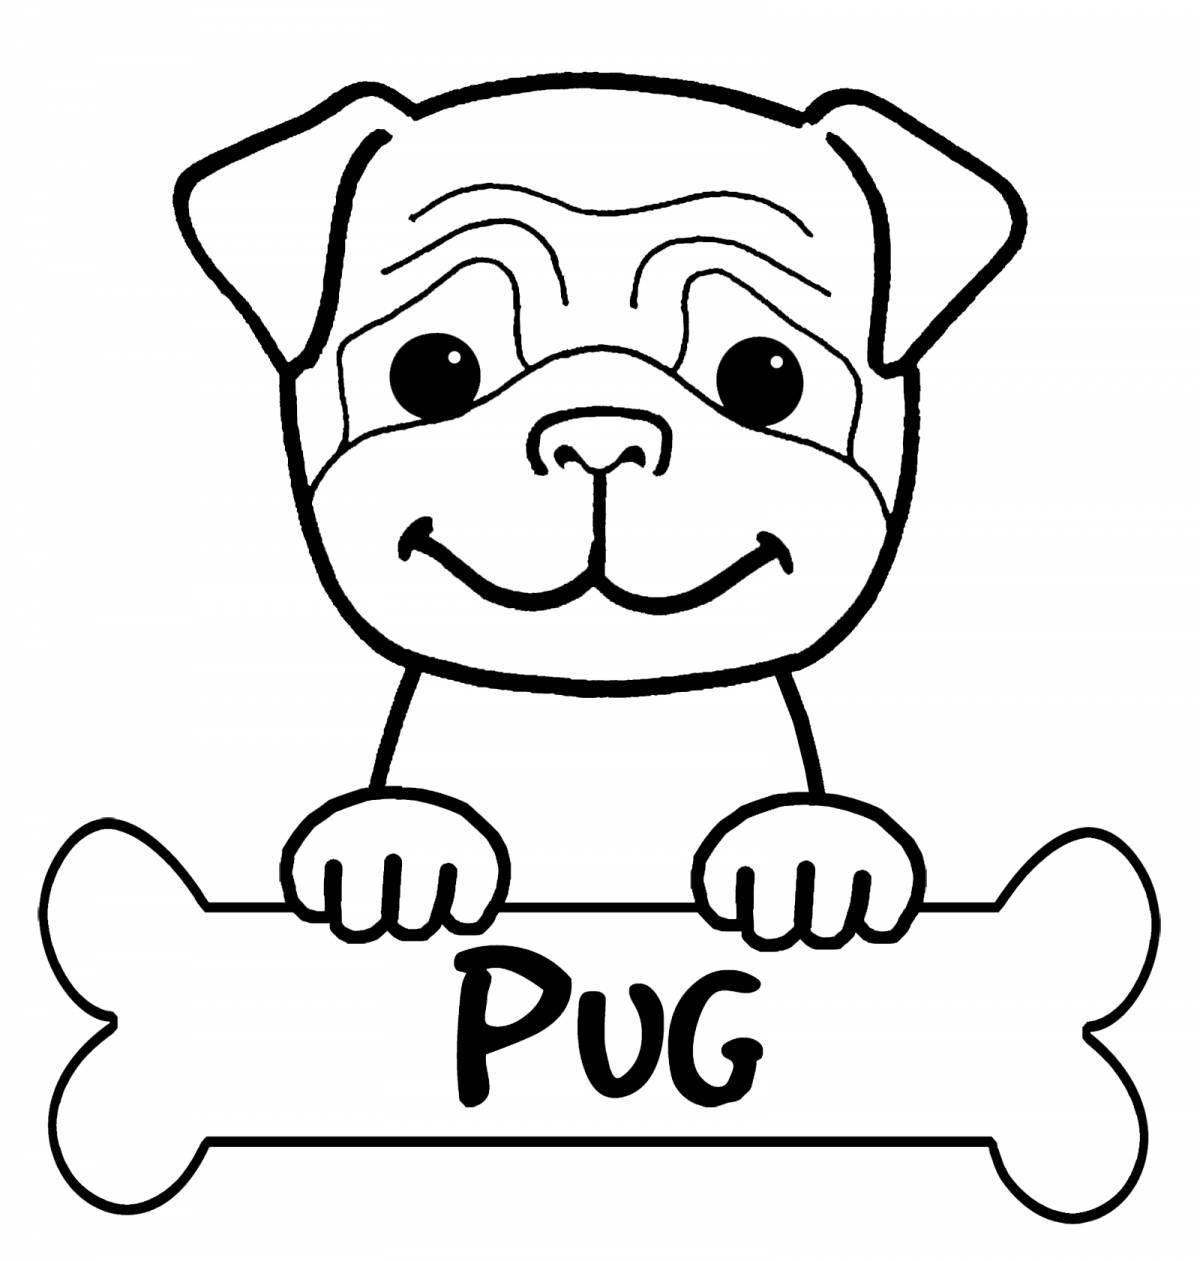 Colorful pug coloring page for kids